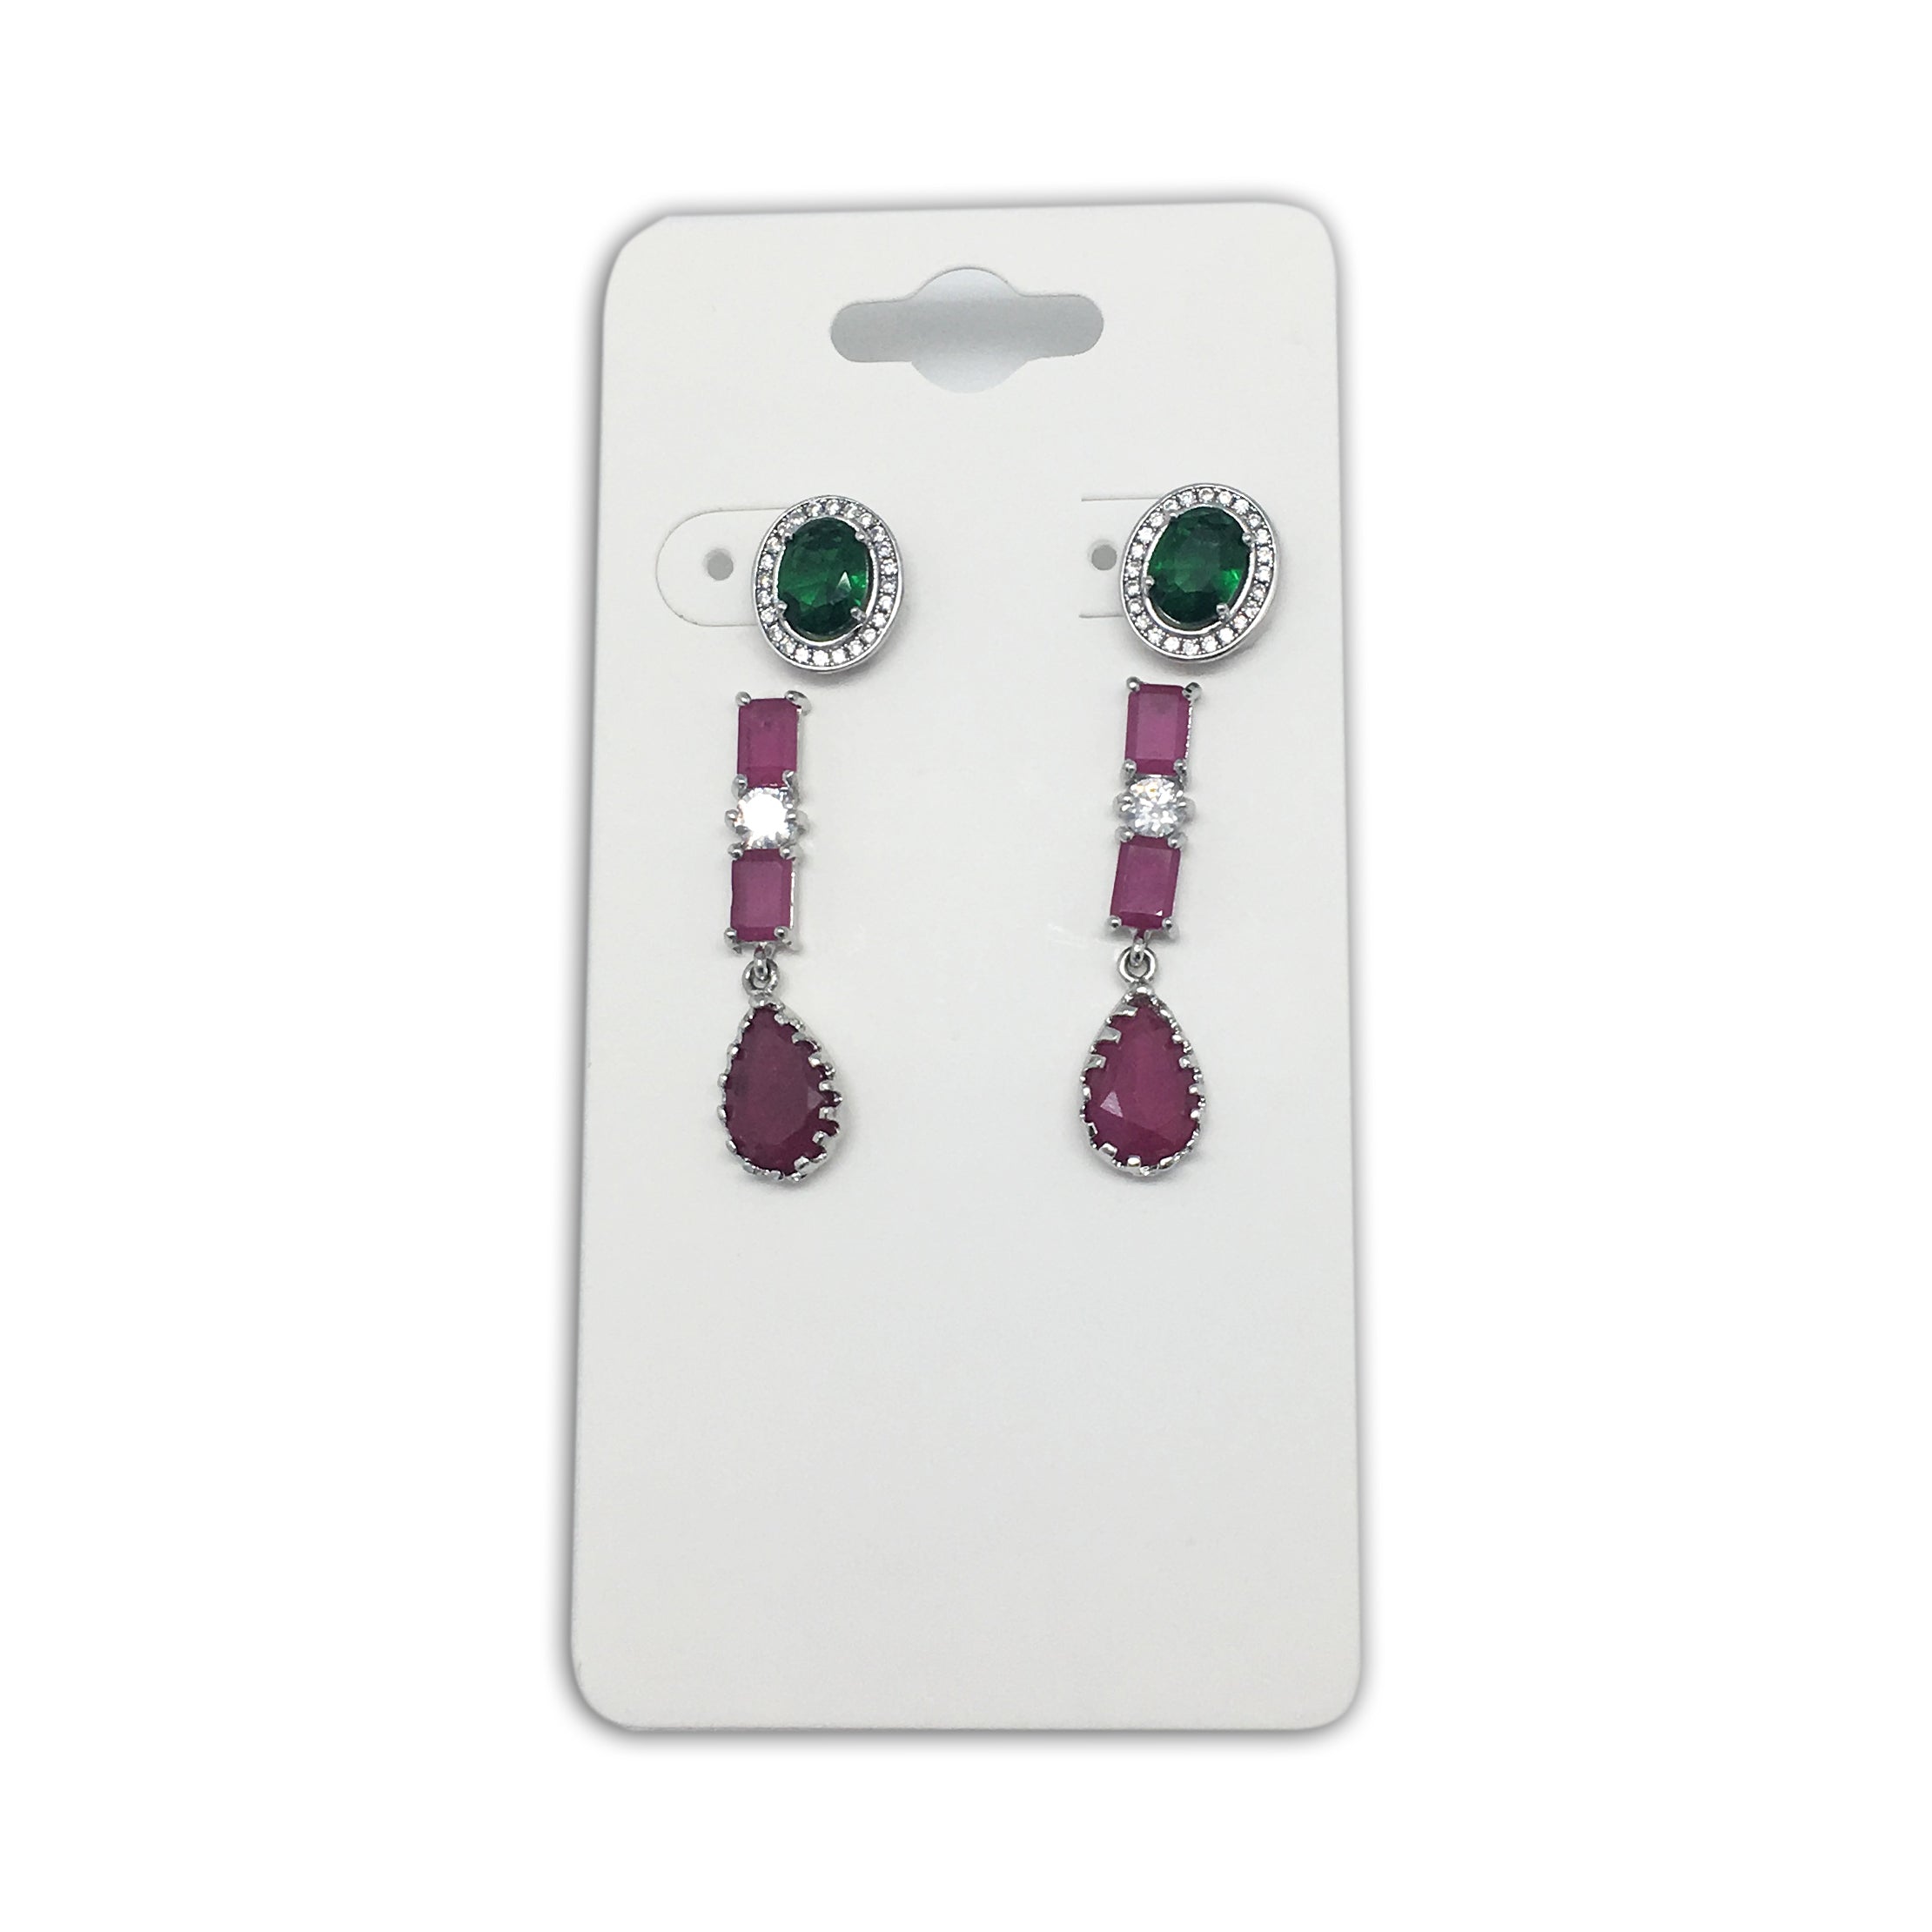 Hanging Earring Cards White 2x2 (100-Pcs)